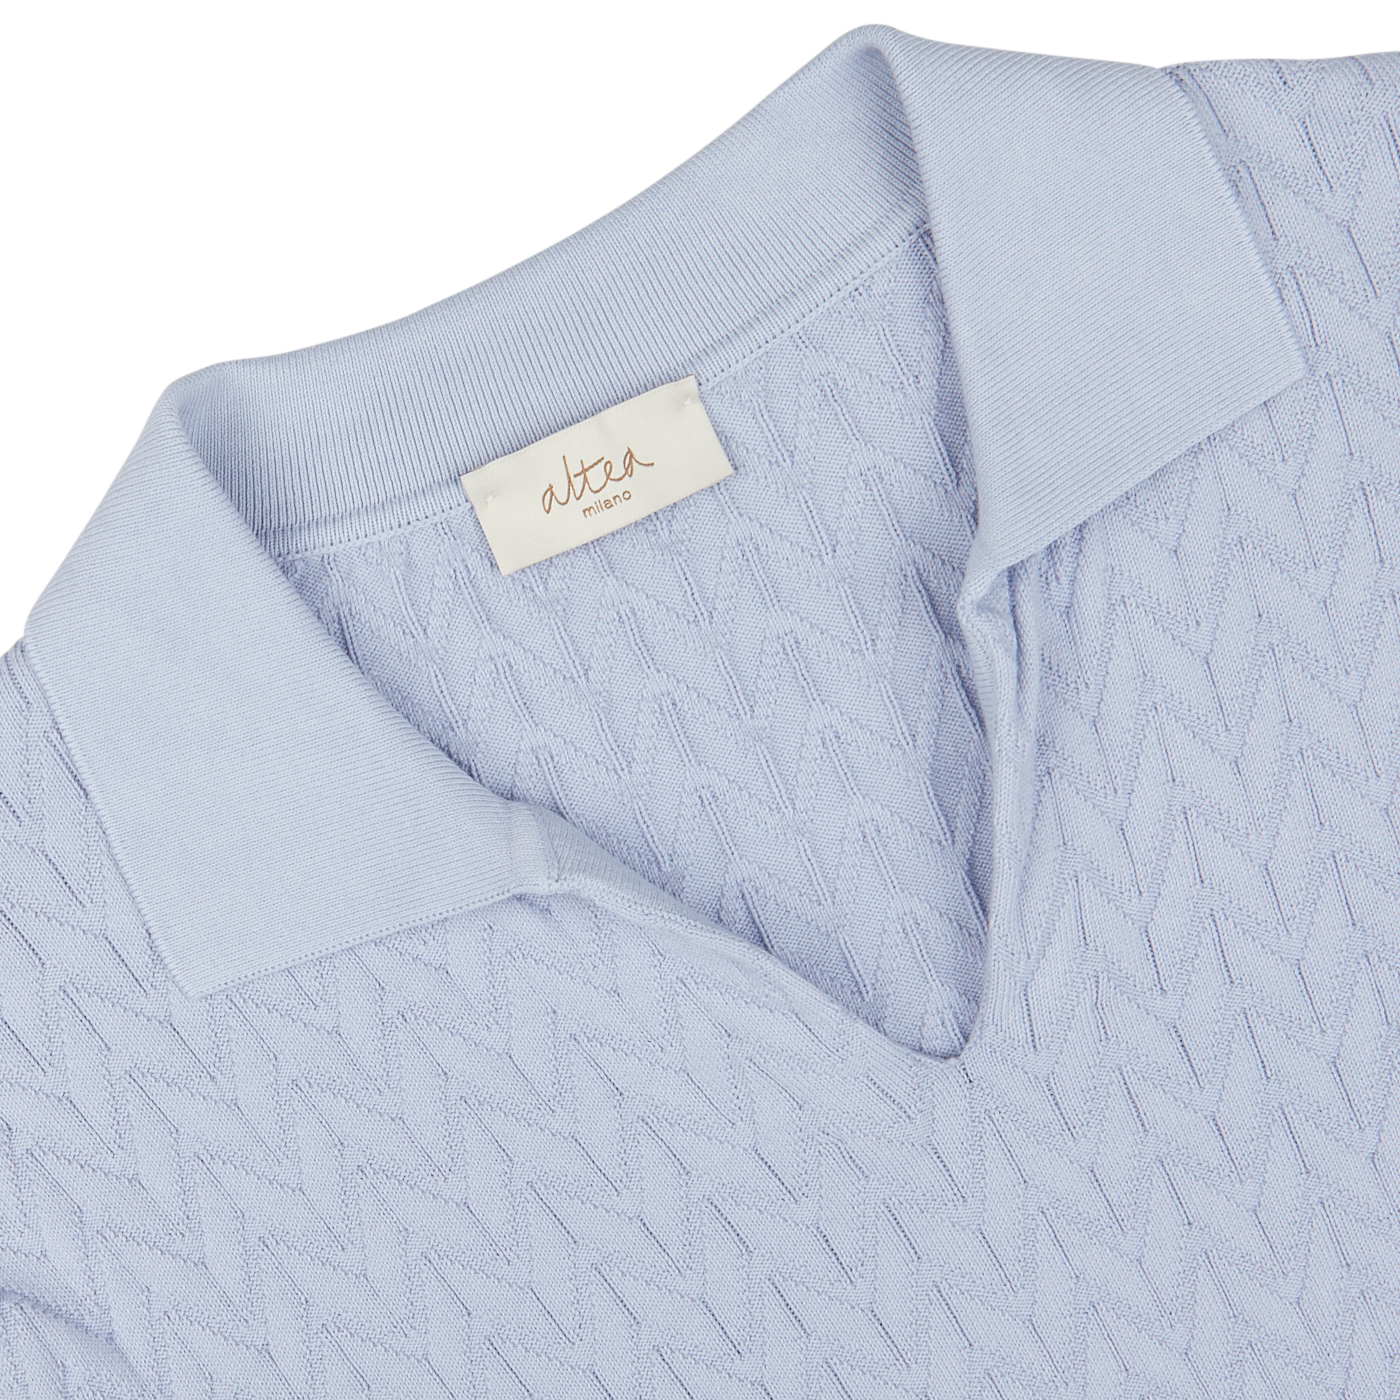 Light blue knitted sweater, made in Italy, with an Altea brand label at the neckline.